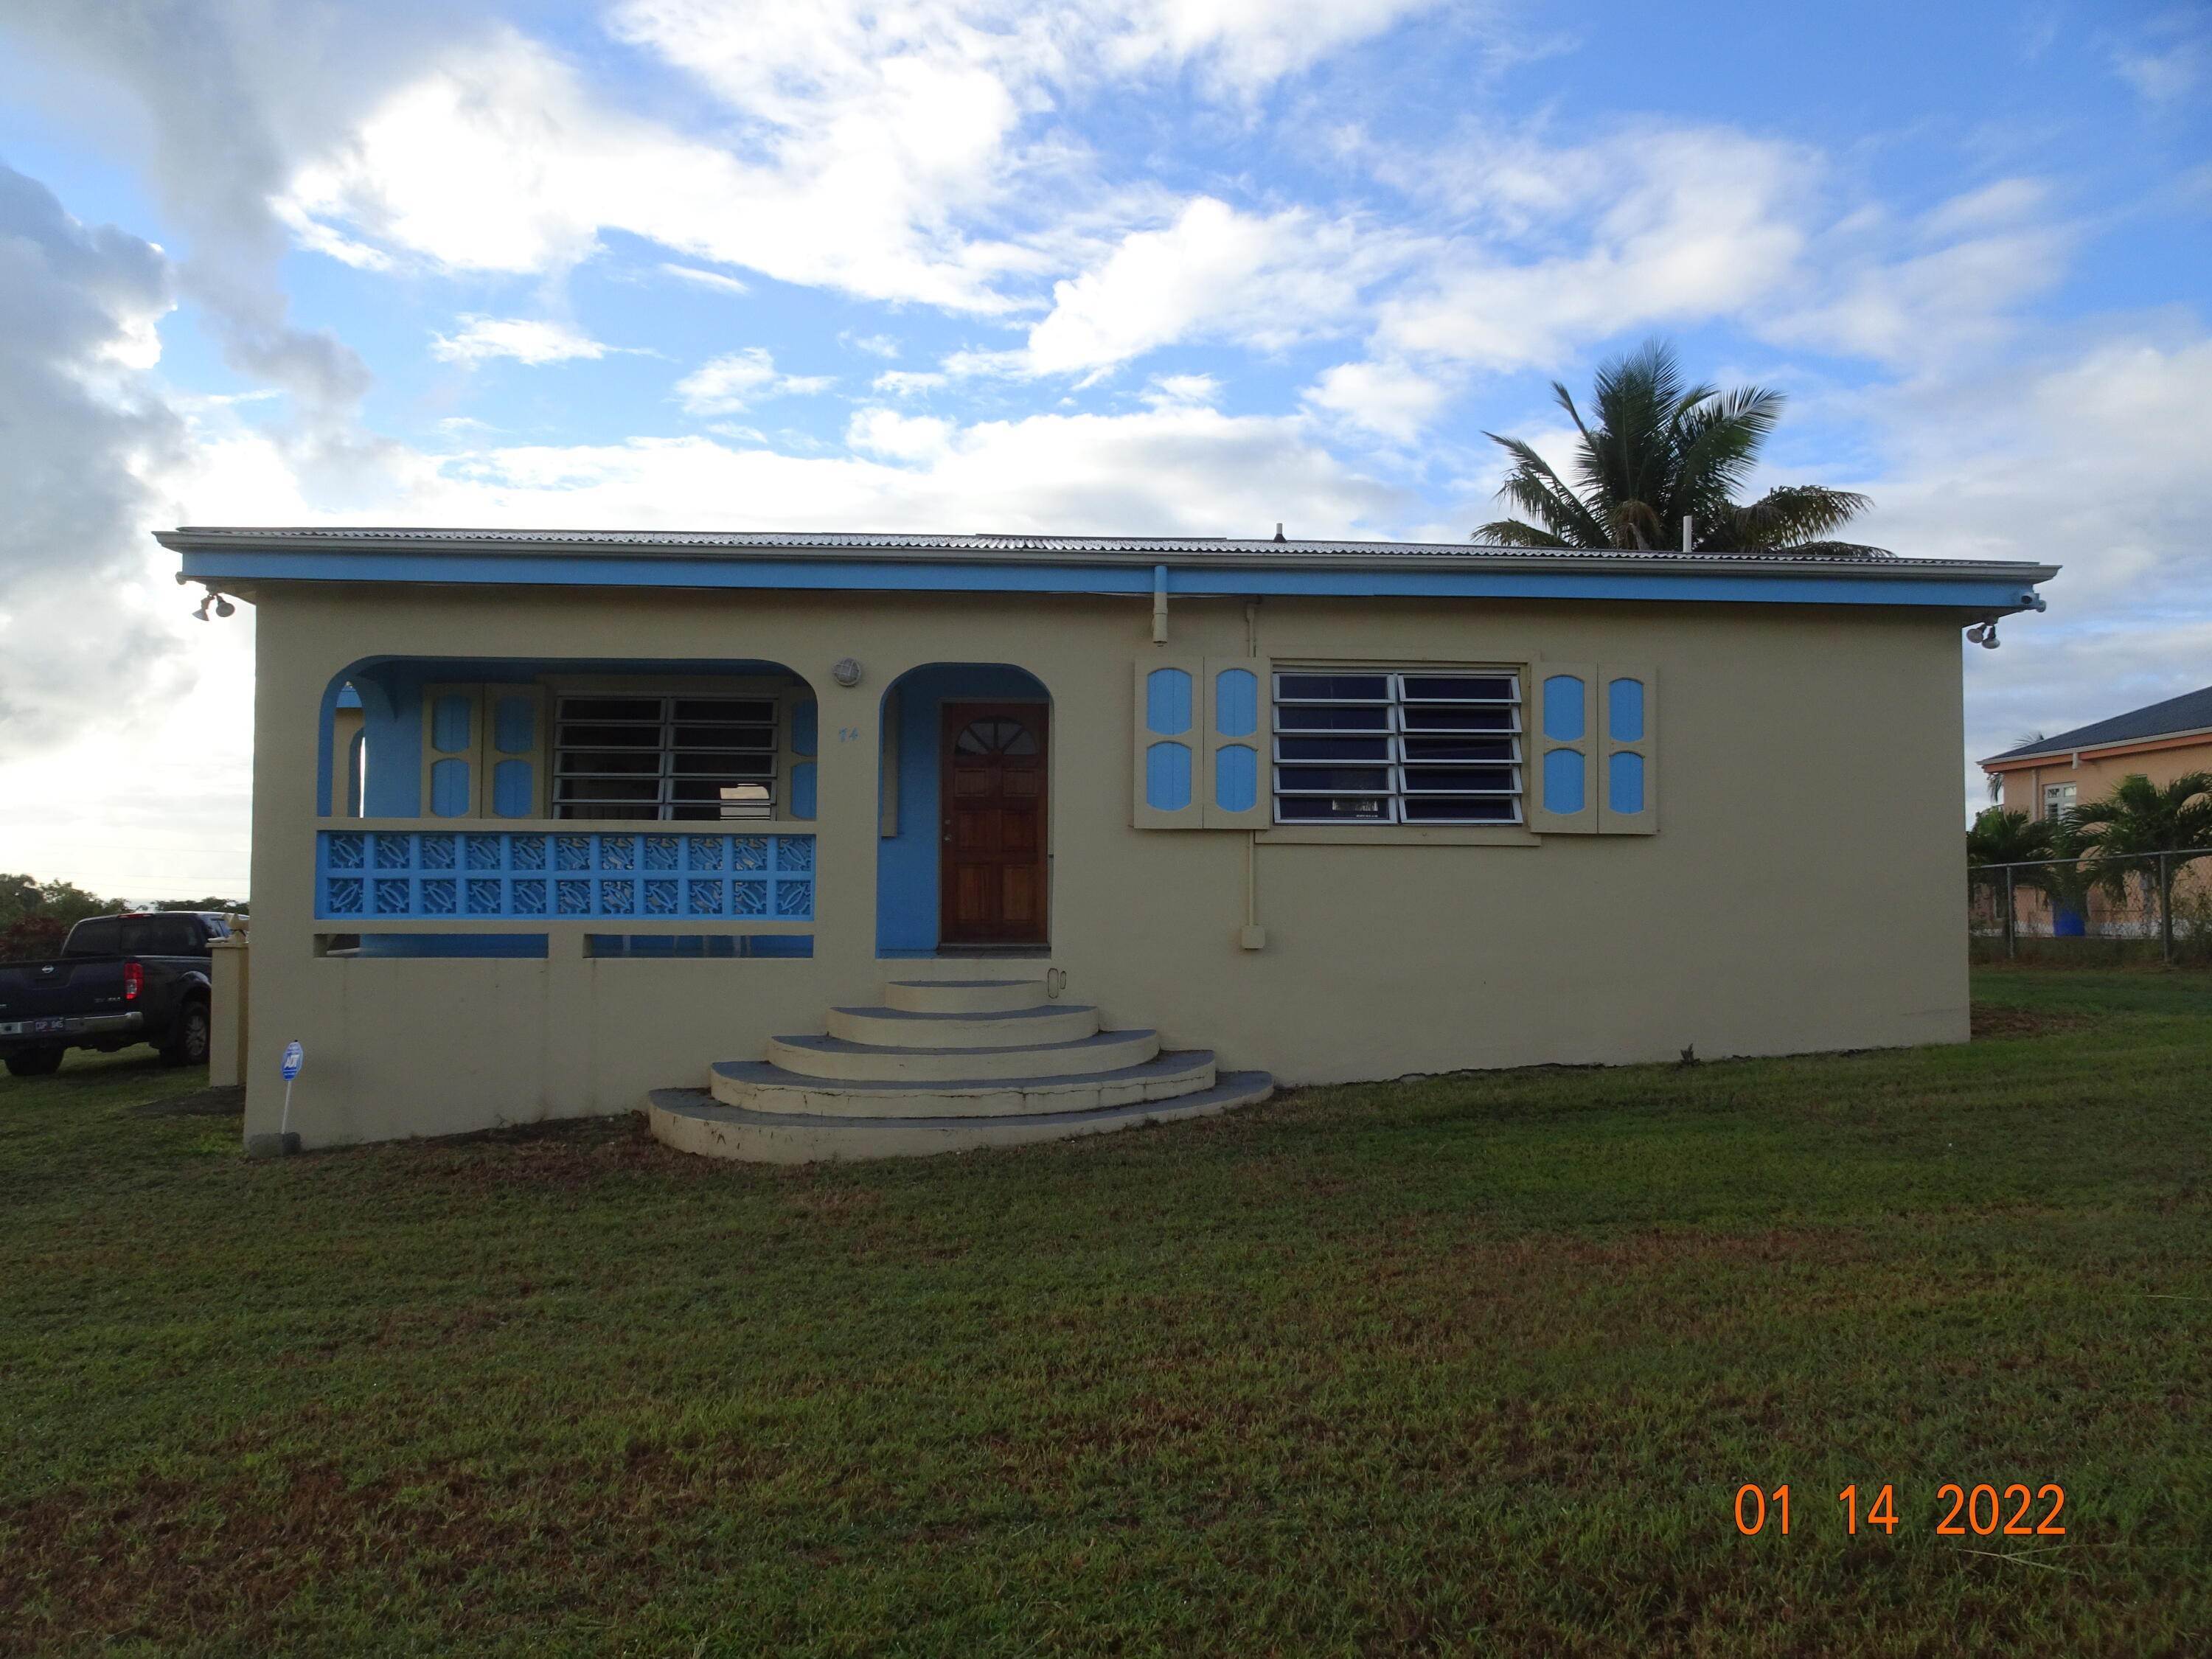 Single Family Homes for Sale at 74 Mountain PR St Croix, Virgin Islands 00840 United States Virgin Islands